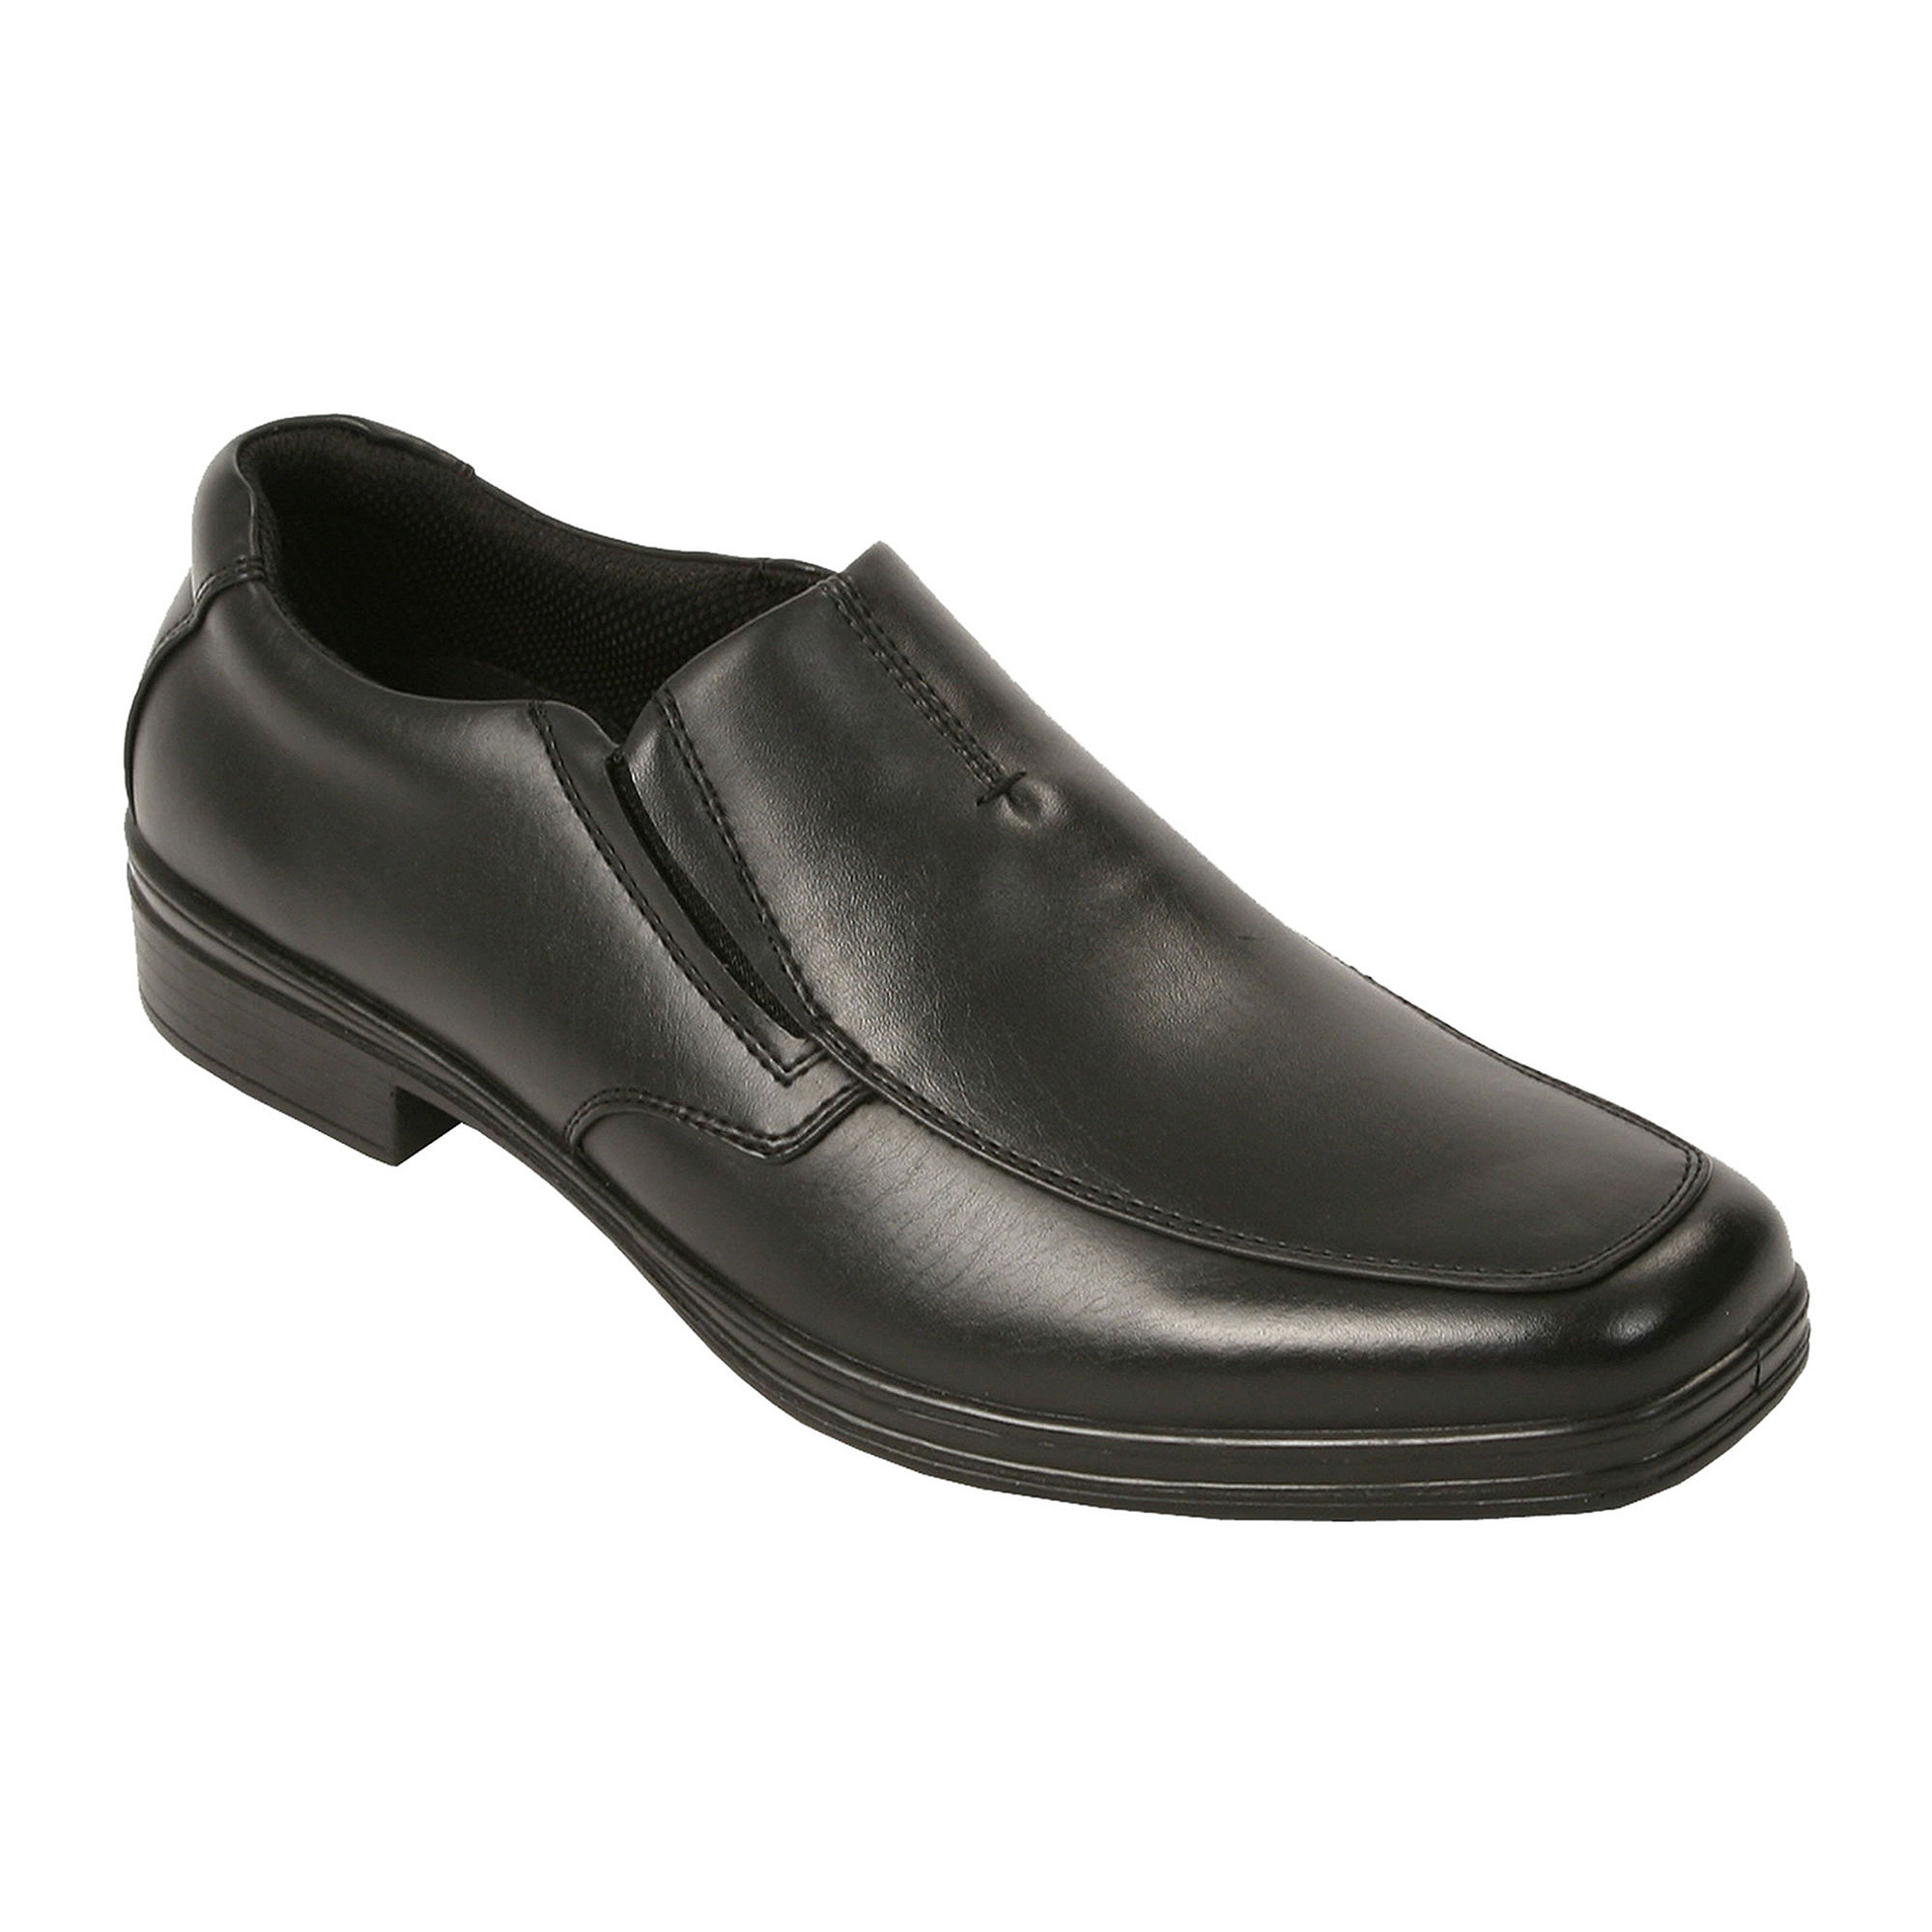 Jcpenney shoes for mens